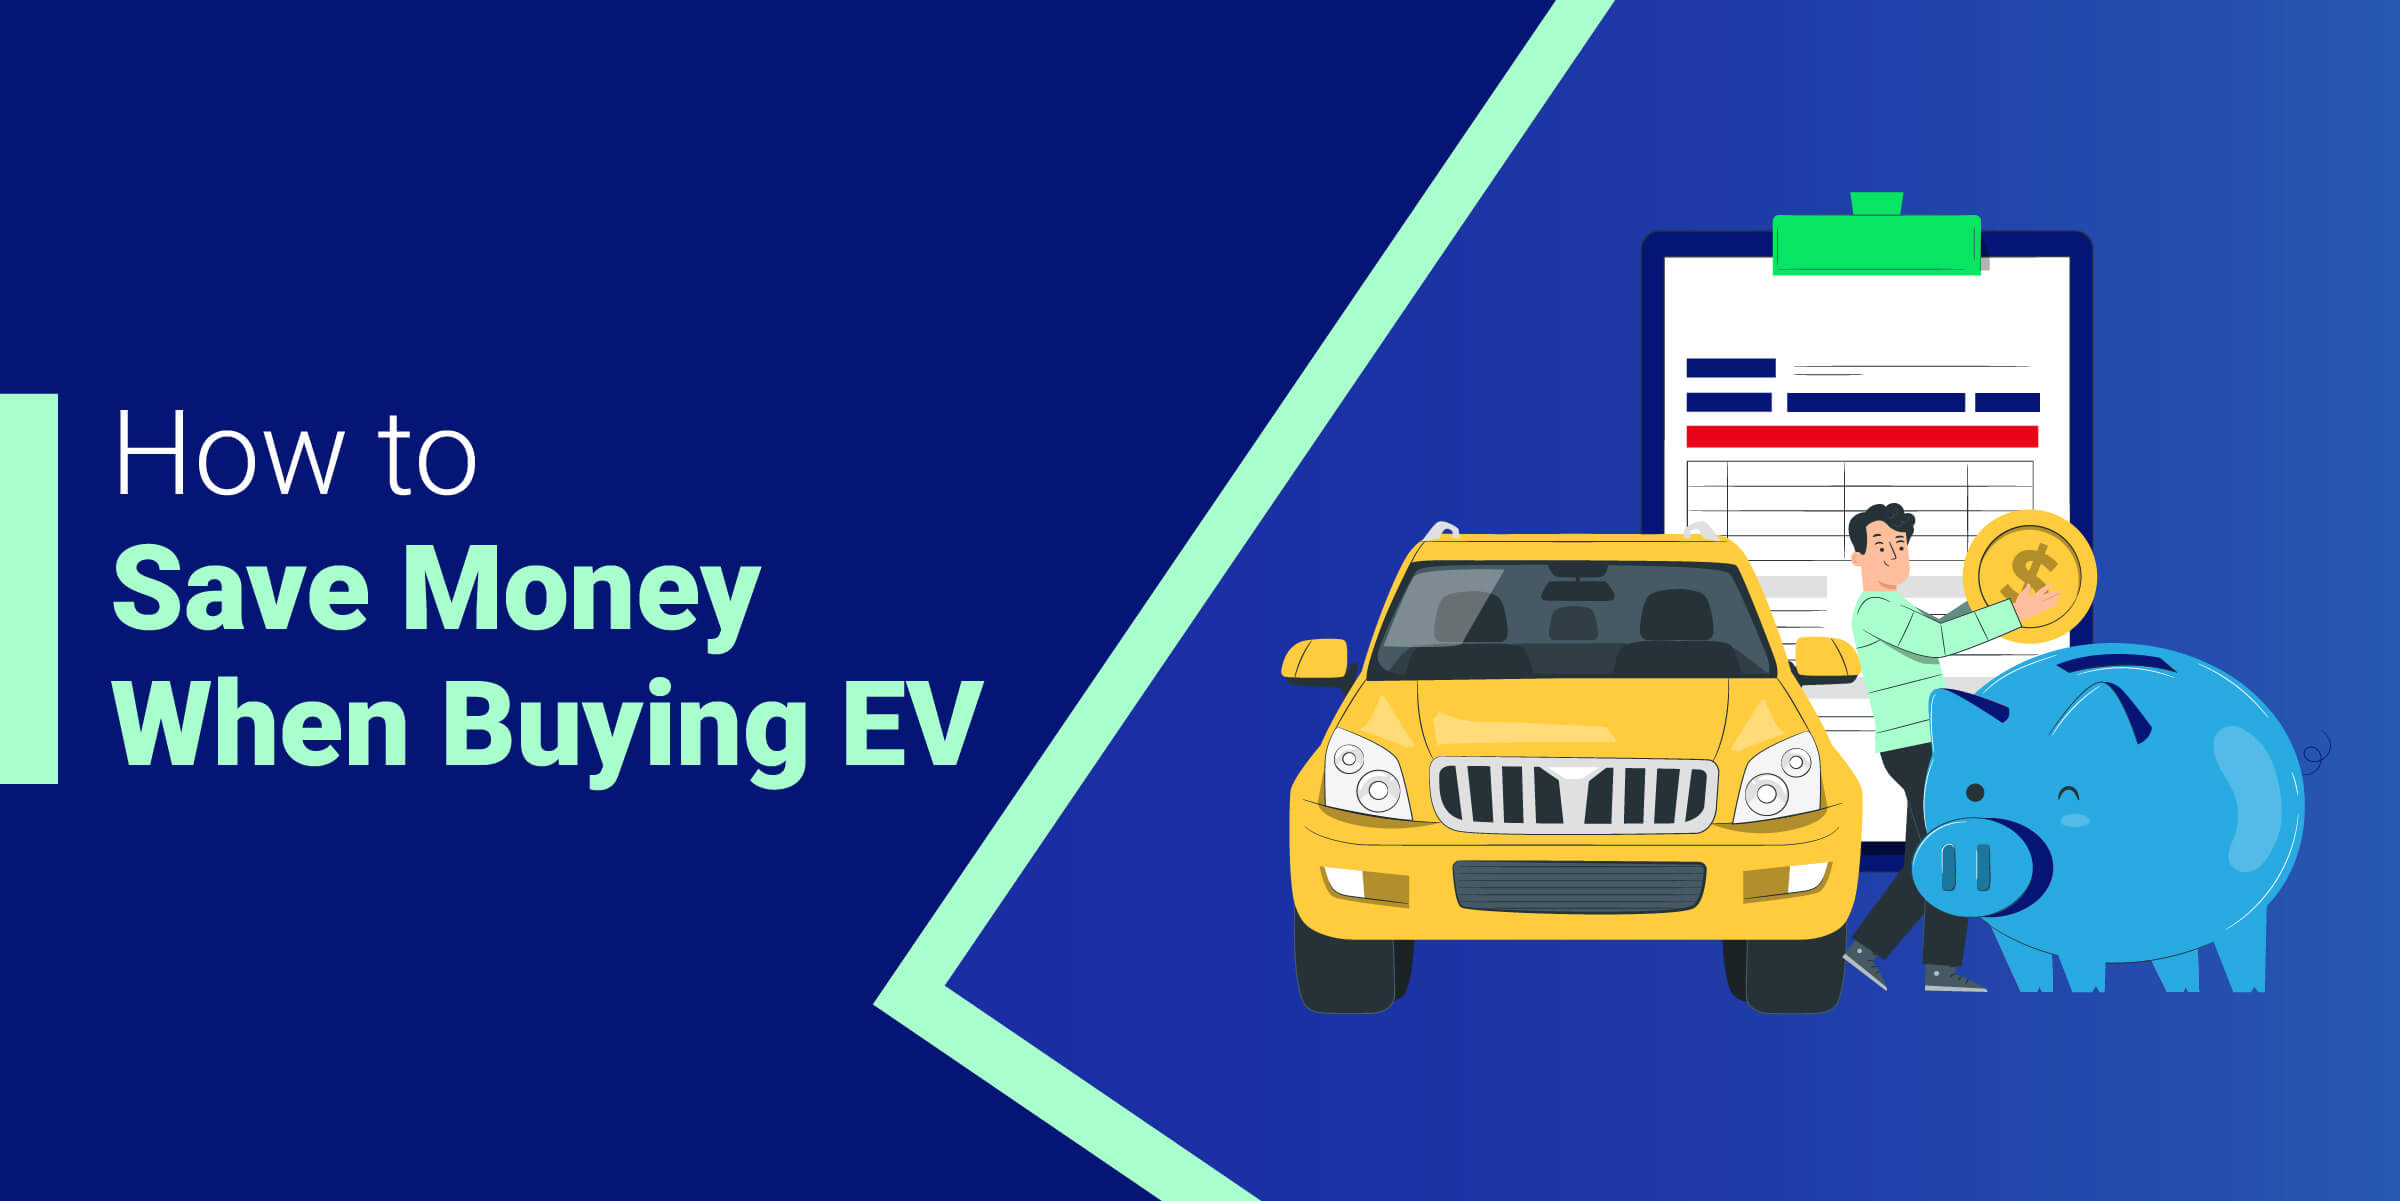 How to Save Money When Buying EV